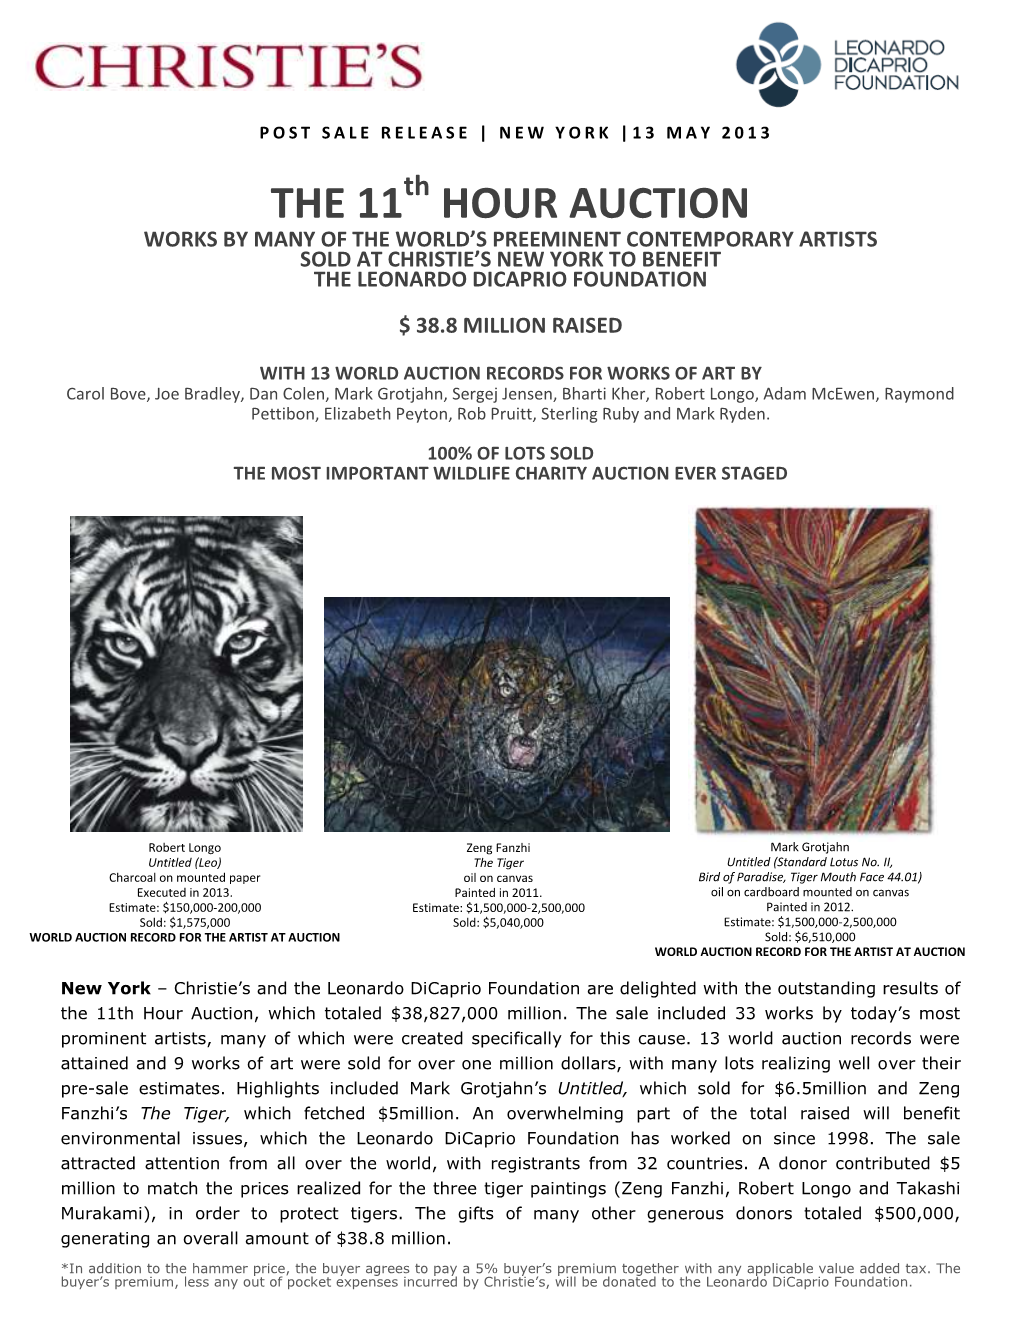 The 11 Hour Auction